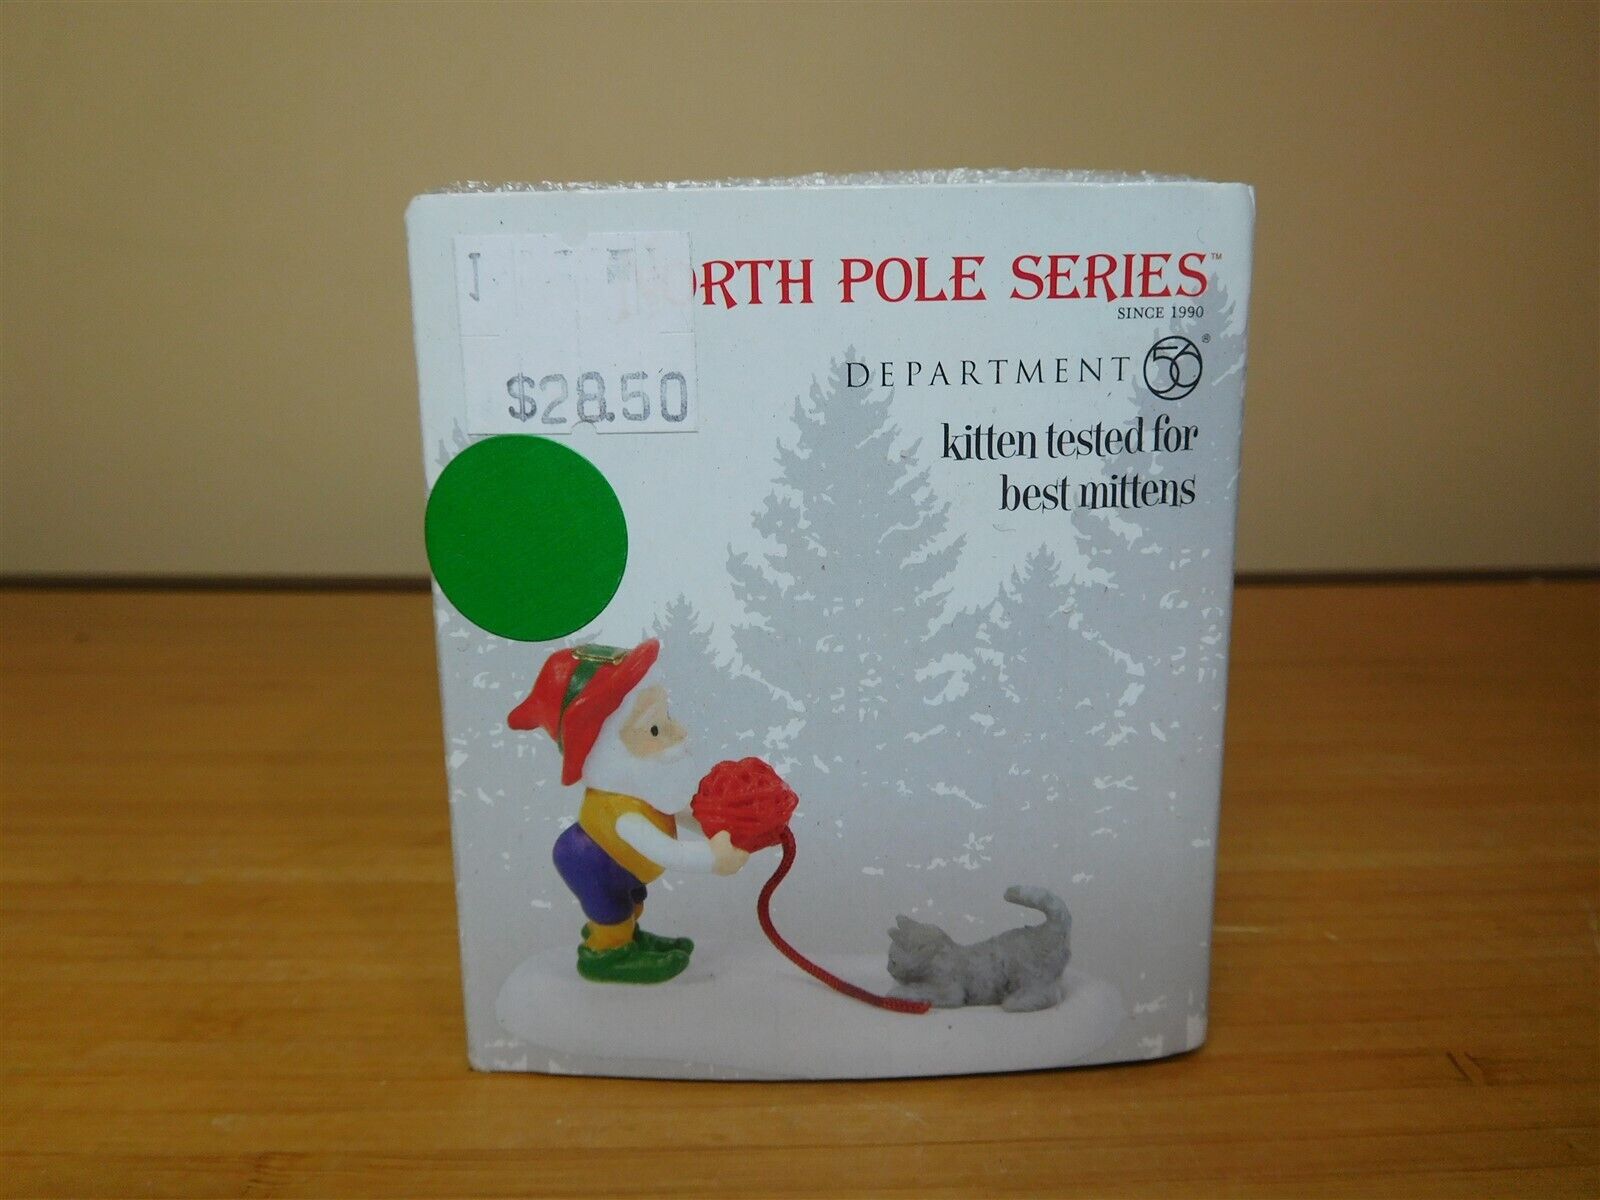 Dept 56 North Pole Accessory - Kitten Tested For Best Mittens - #6007616 - NIB 